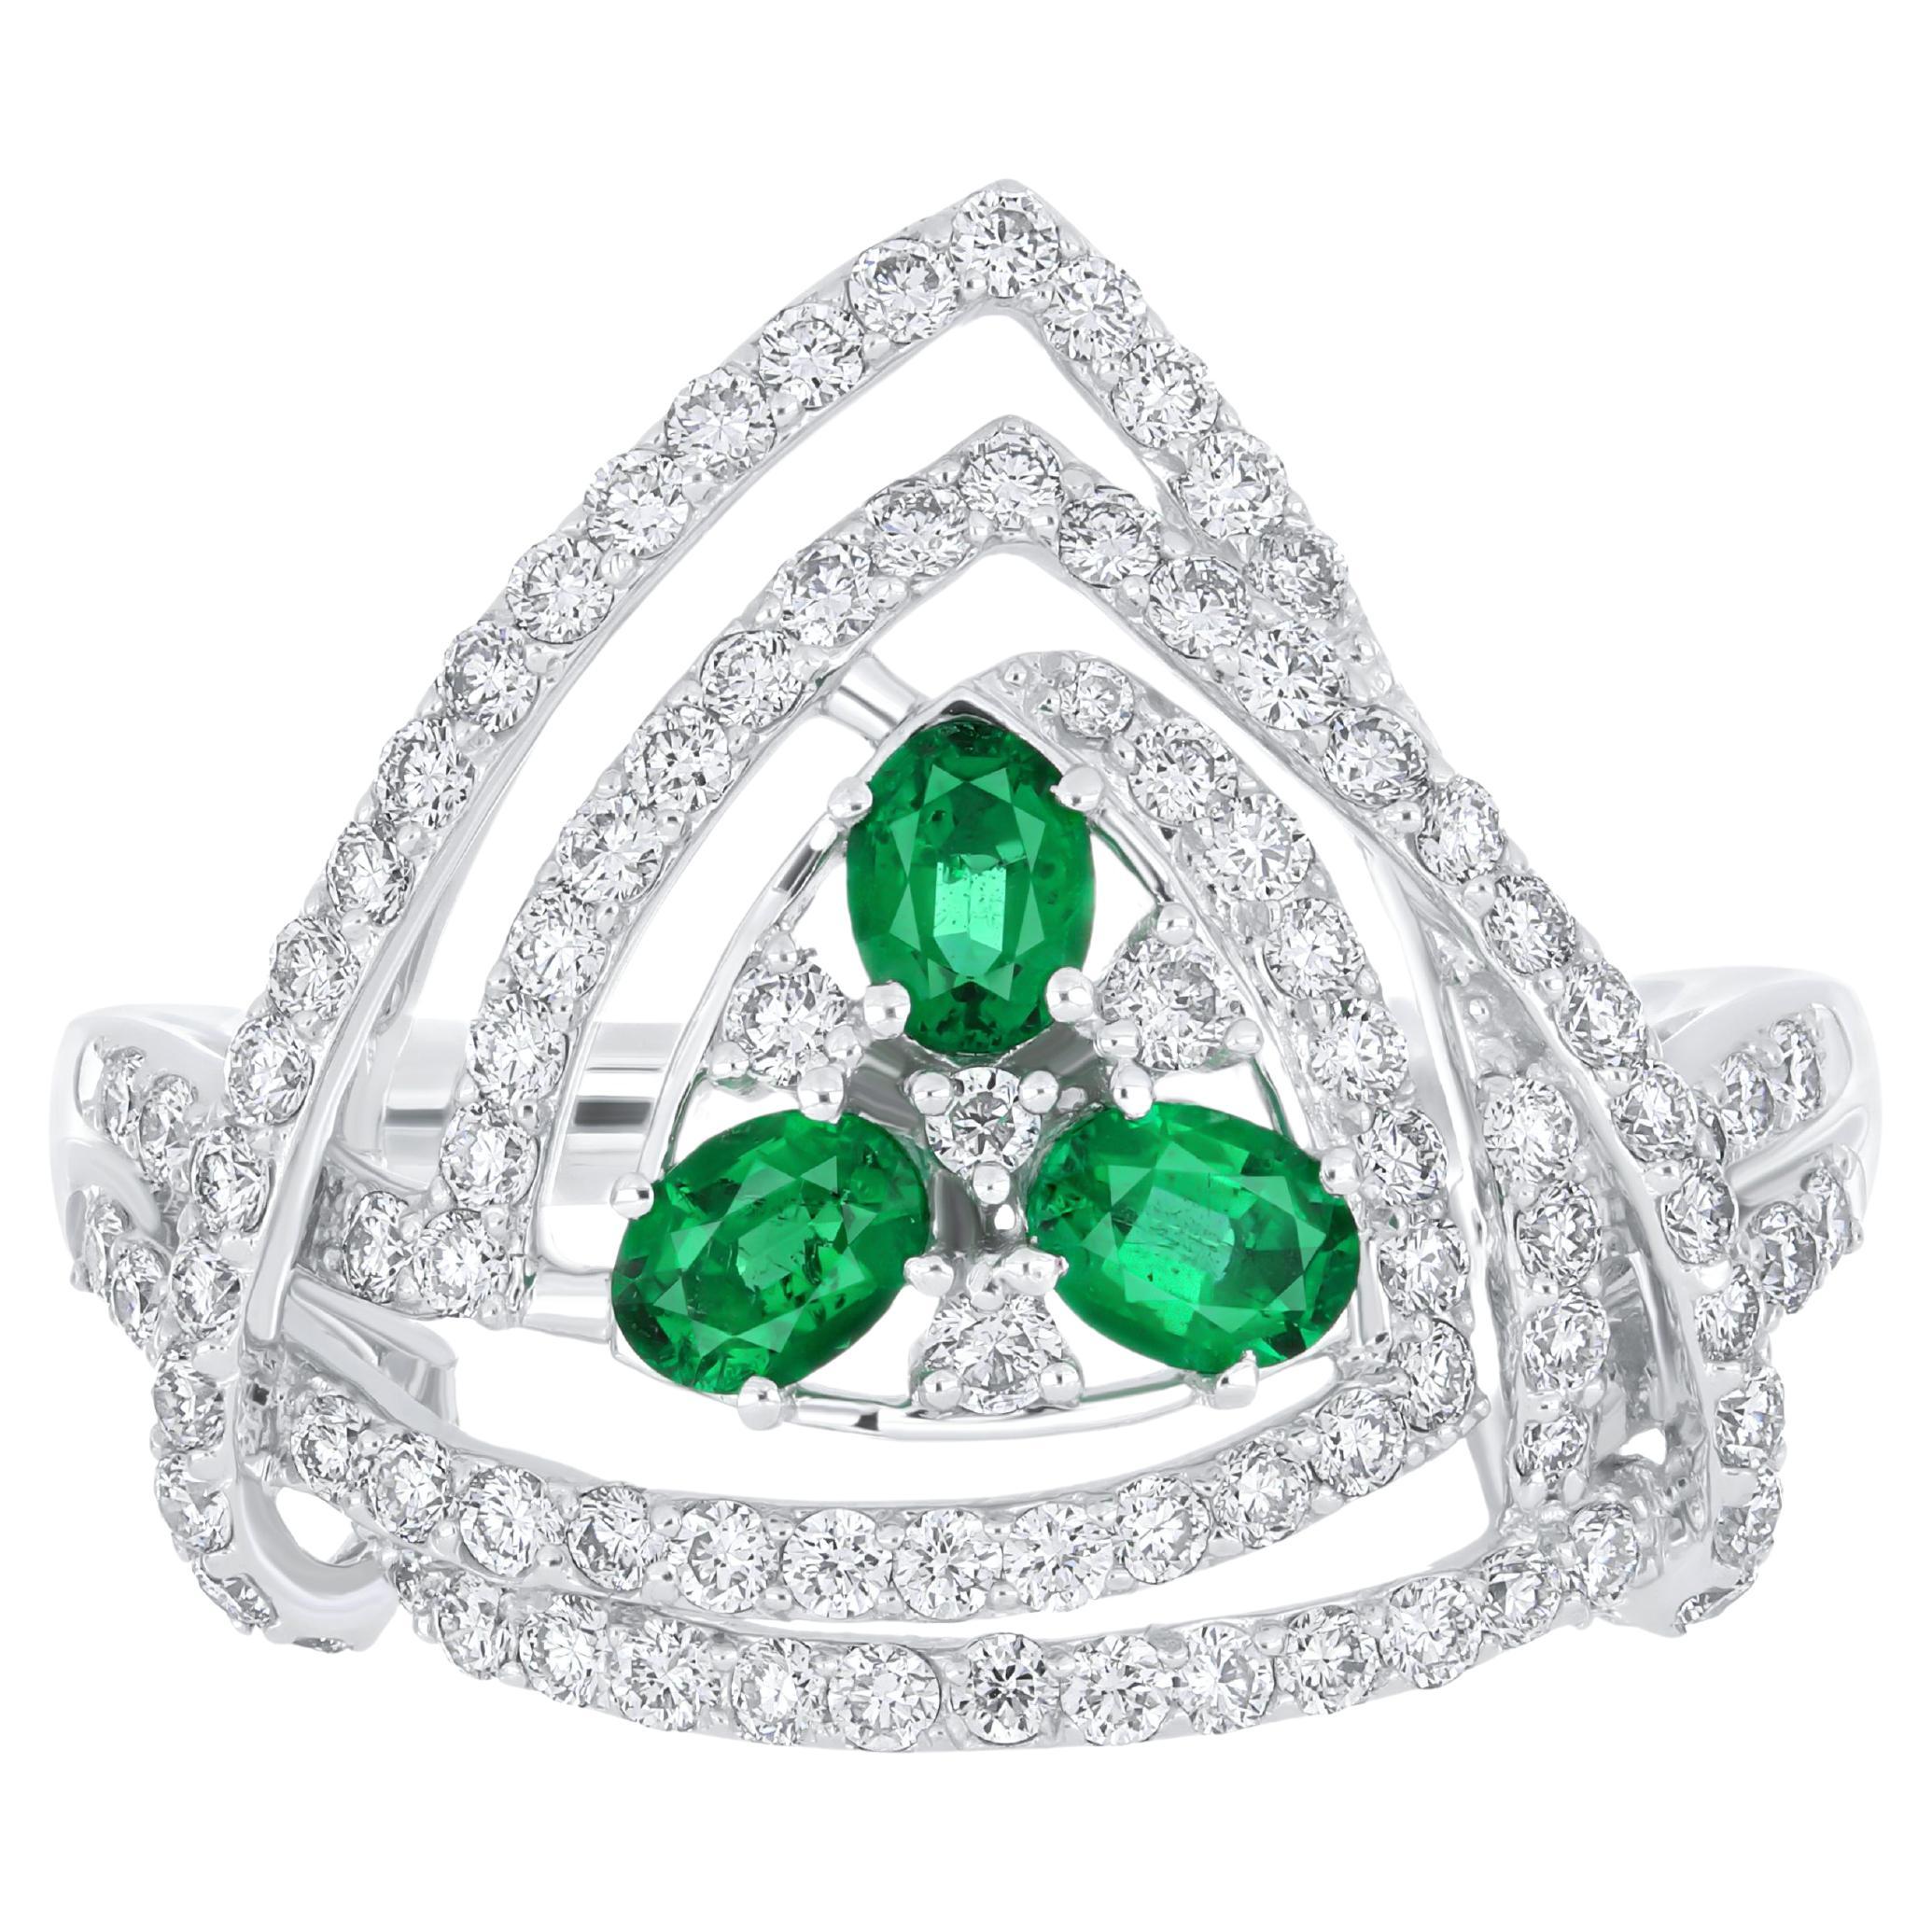 For Sale:  Emerald and Diamond Studded Ring in 18 Karat White Gold